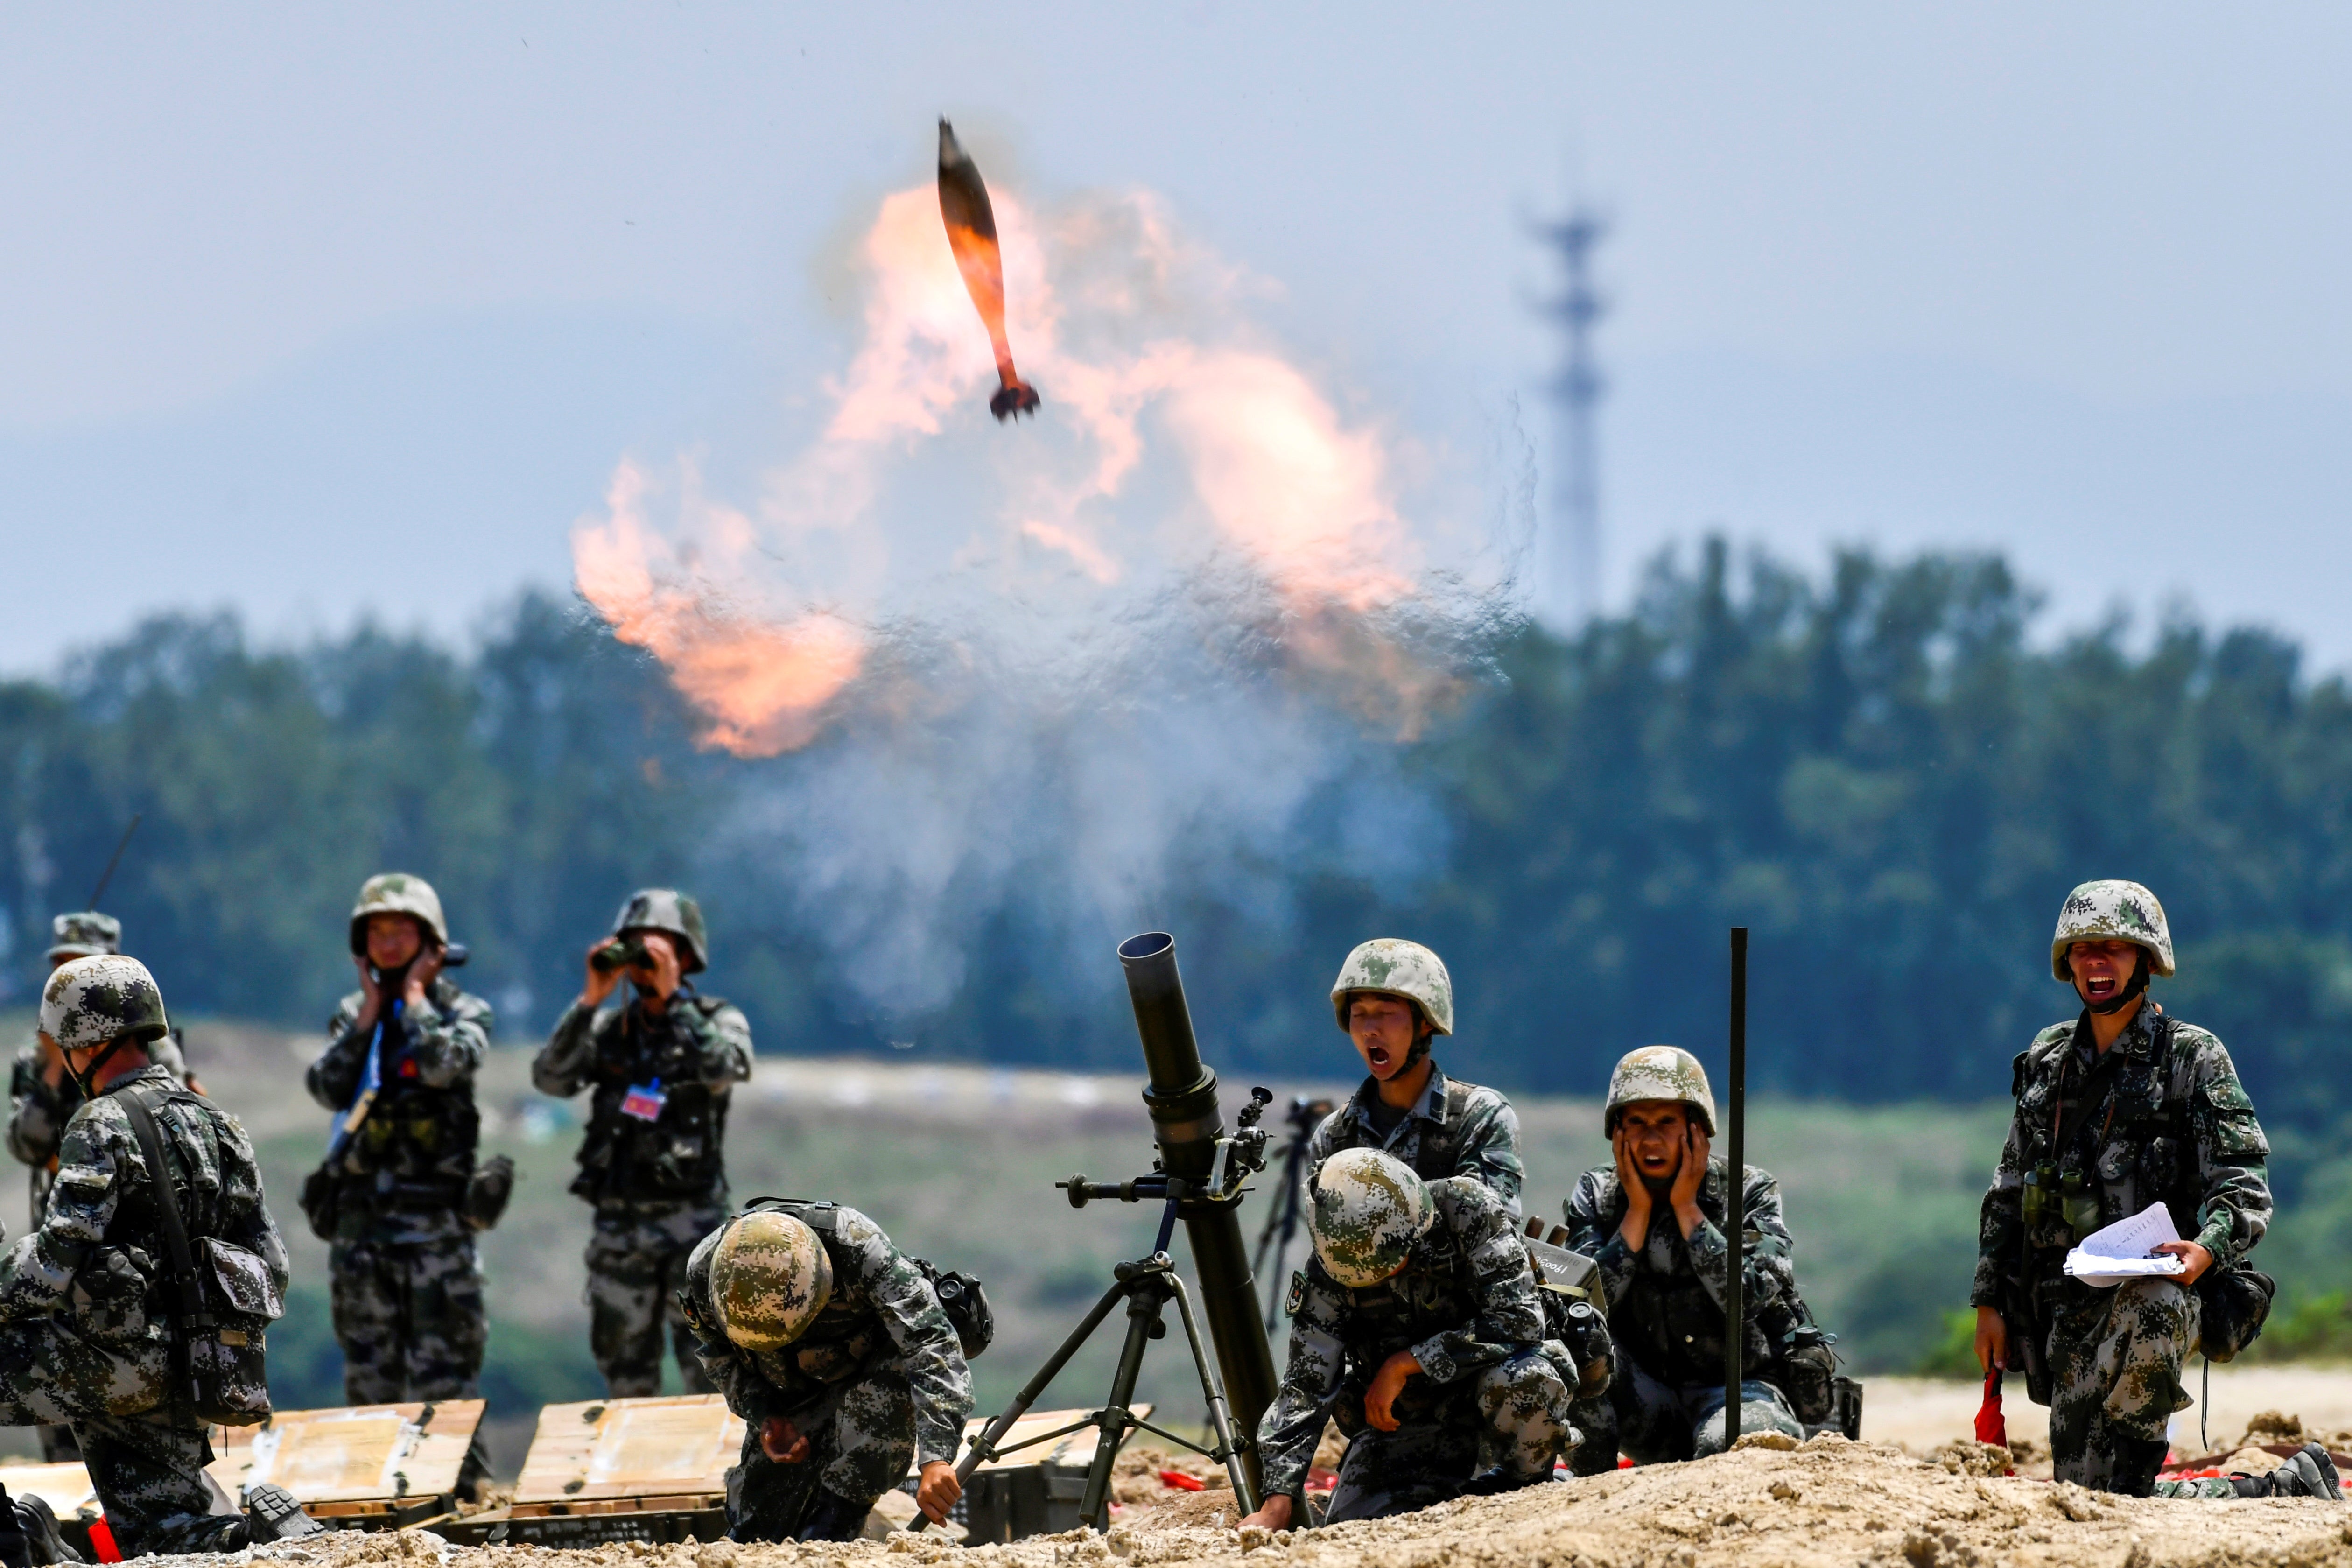 Soldiers of the Chinese People’s Liberation Army fire a mortar during a live-fire military exercise last month